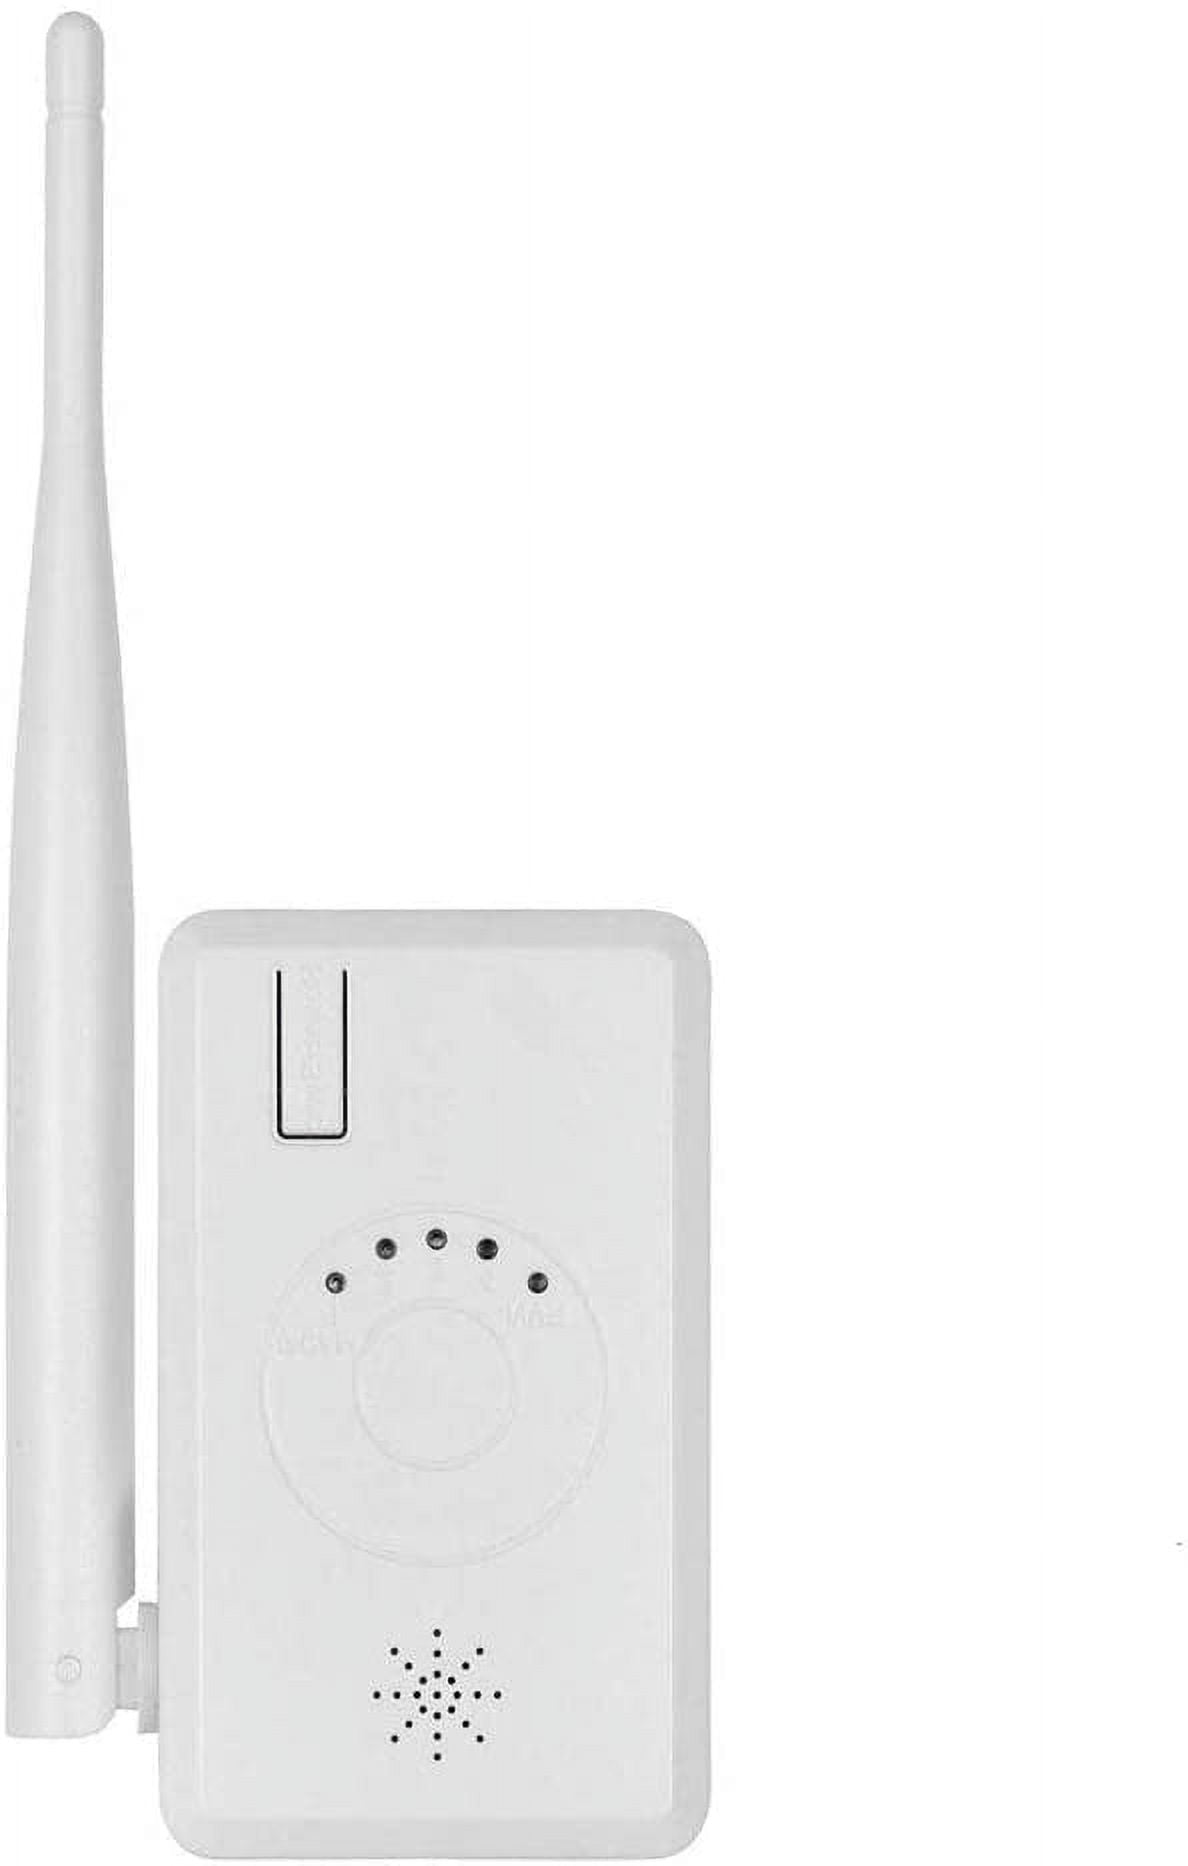 Wireless WIFI Booster Repetidor Repeater 1200Mbps Remote Wi-Fi